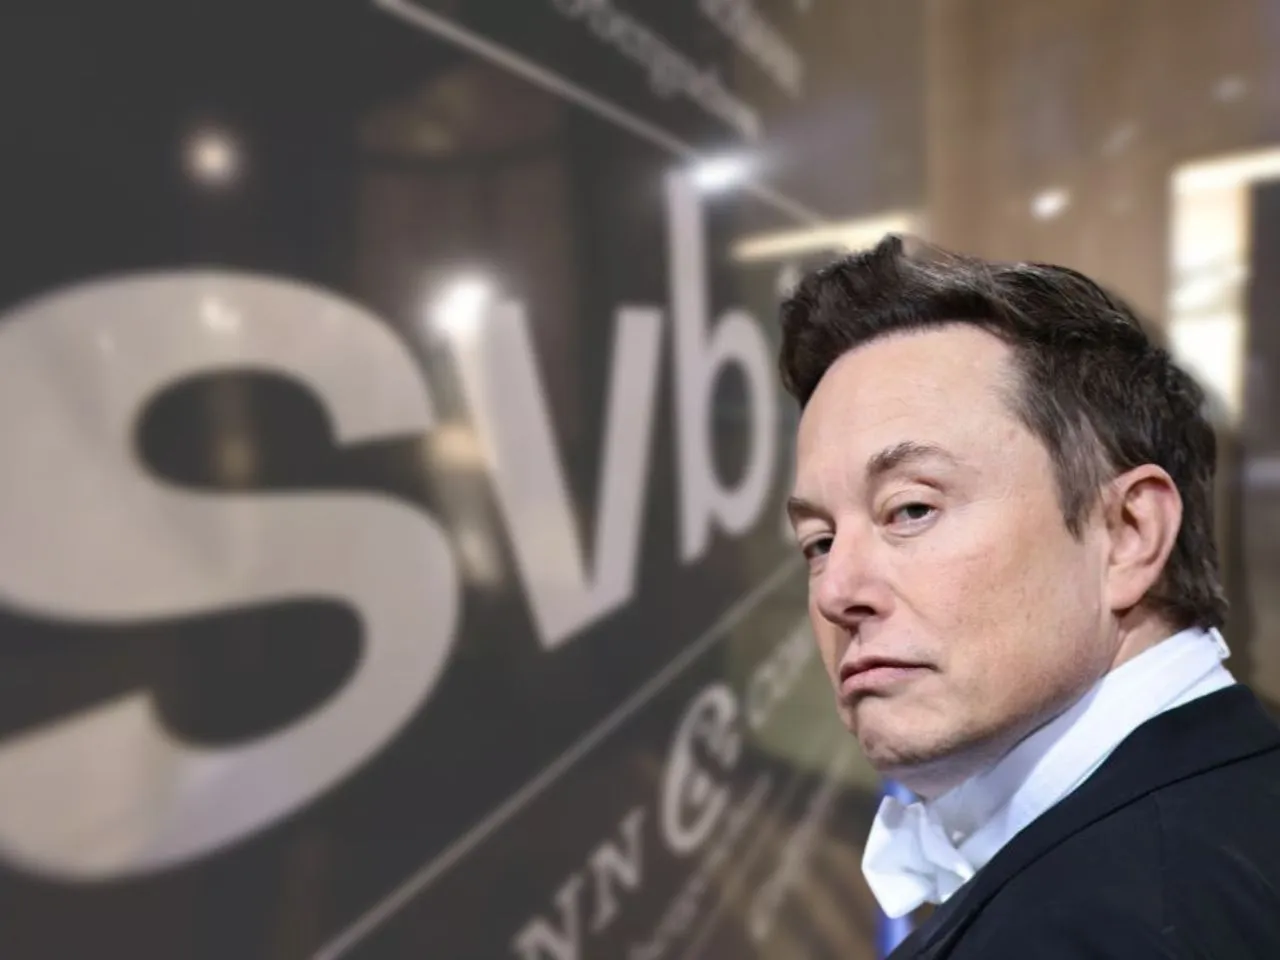 What’s Elon Musk’s ‘End Game’ Behind His Tweet On SVB Collapse?